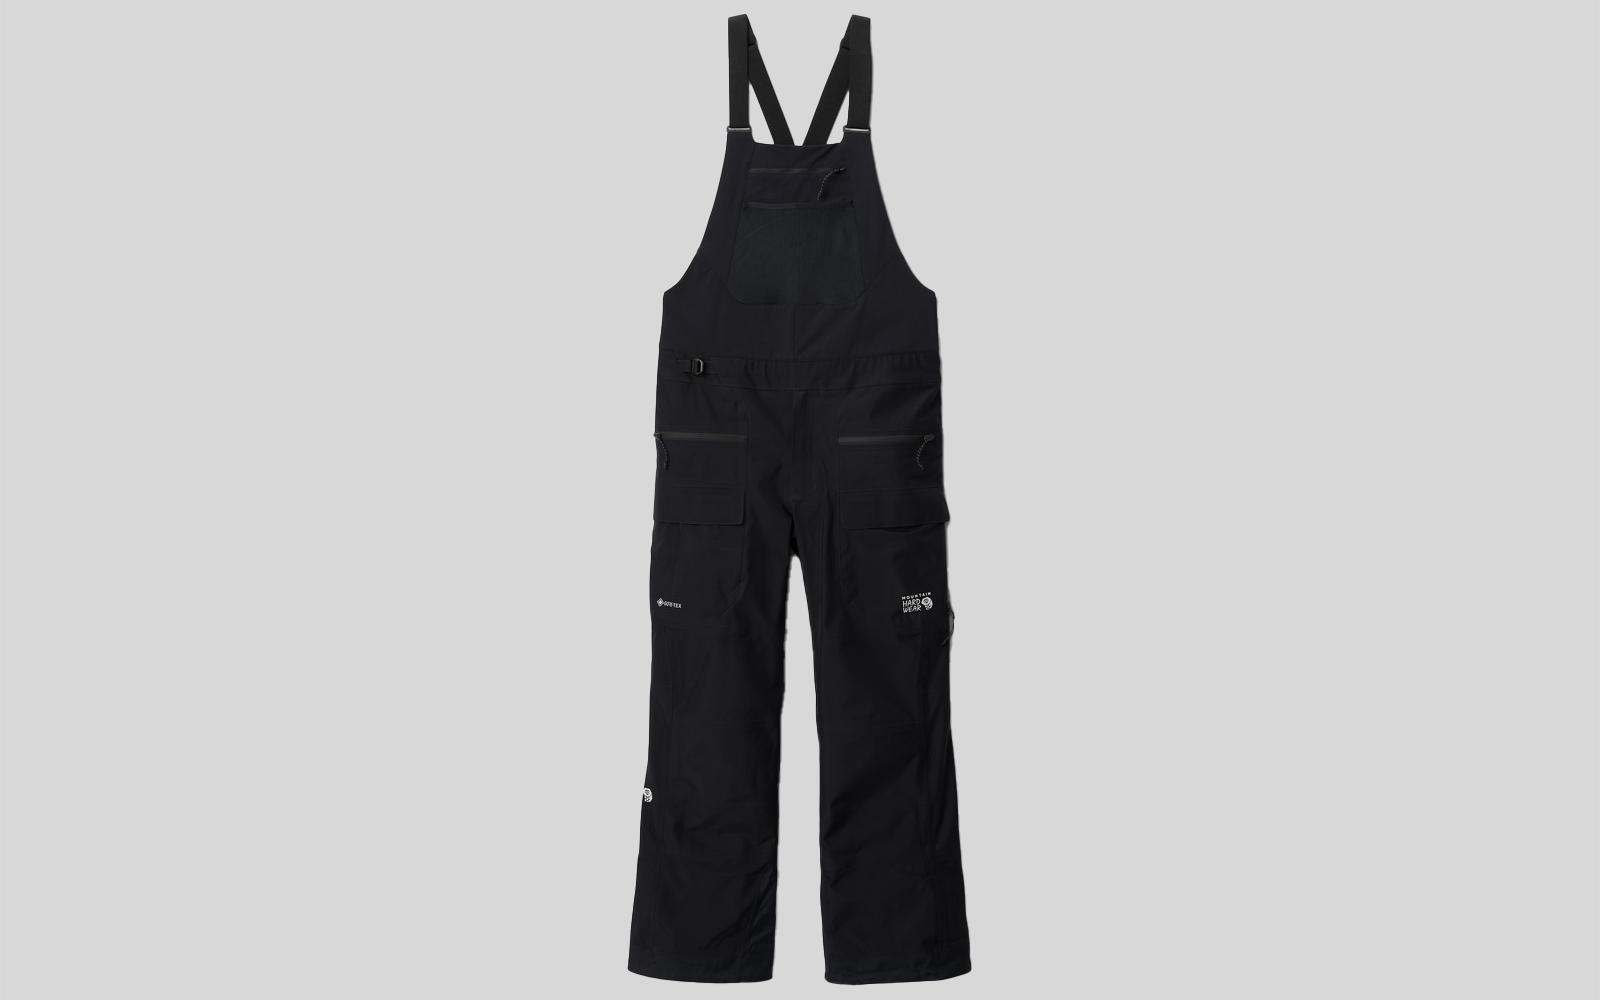 [Giveaway] Win a men's or women's Boundary Ridge kit from Mountain ...